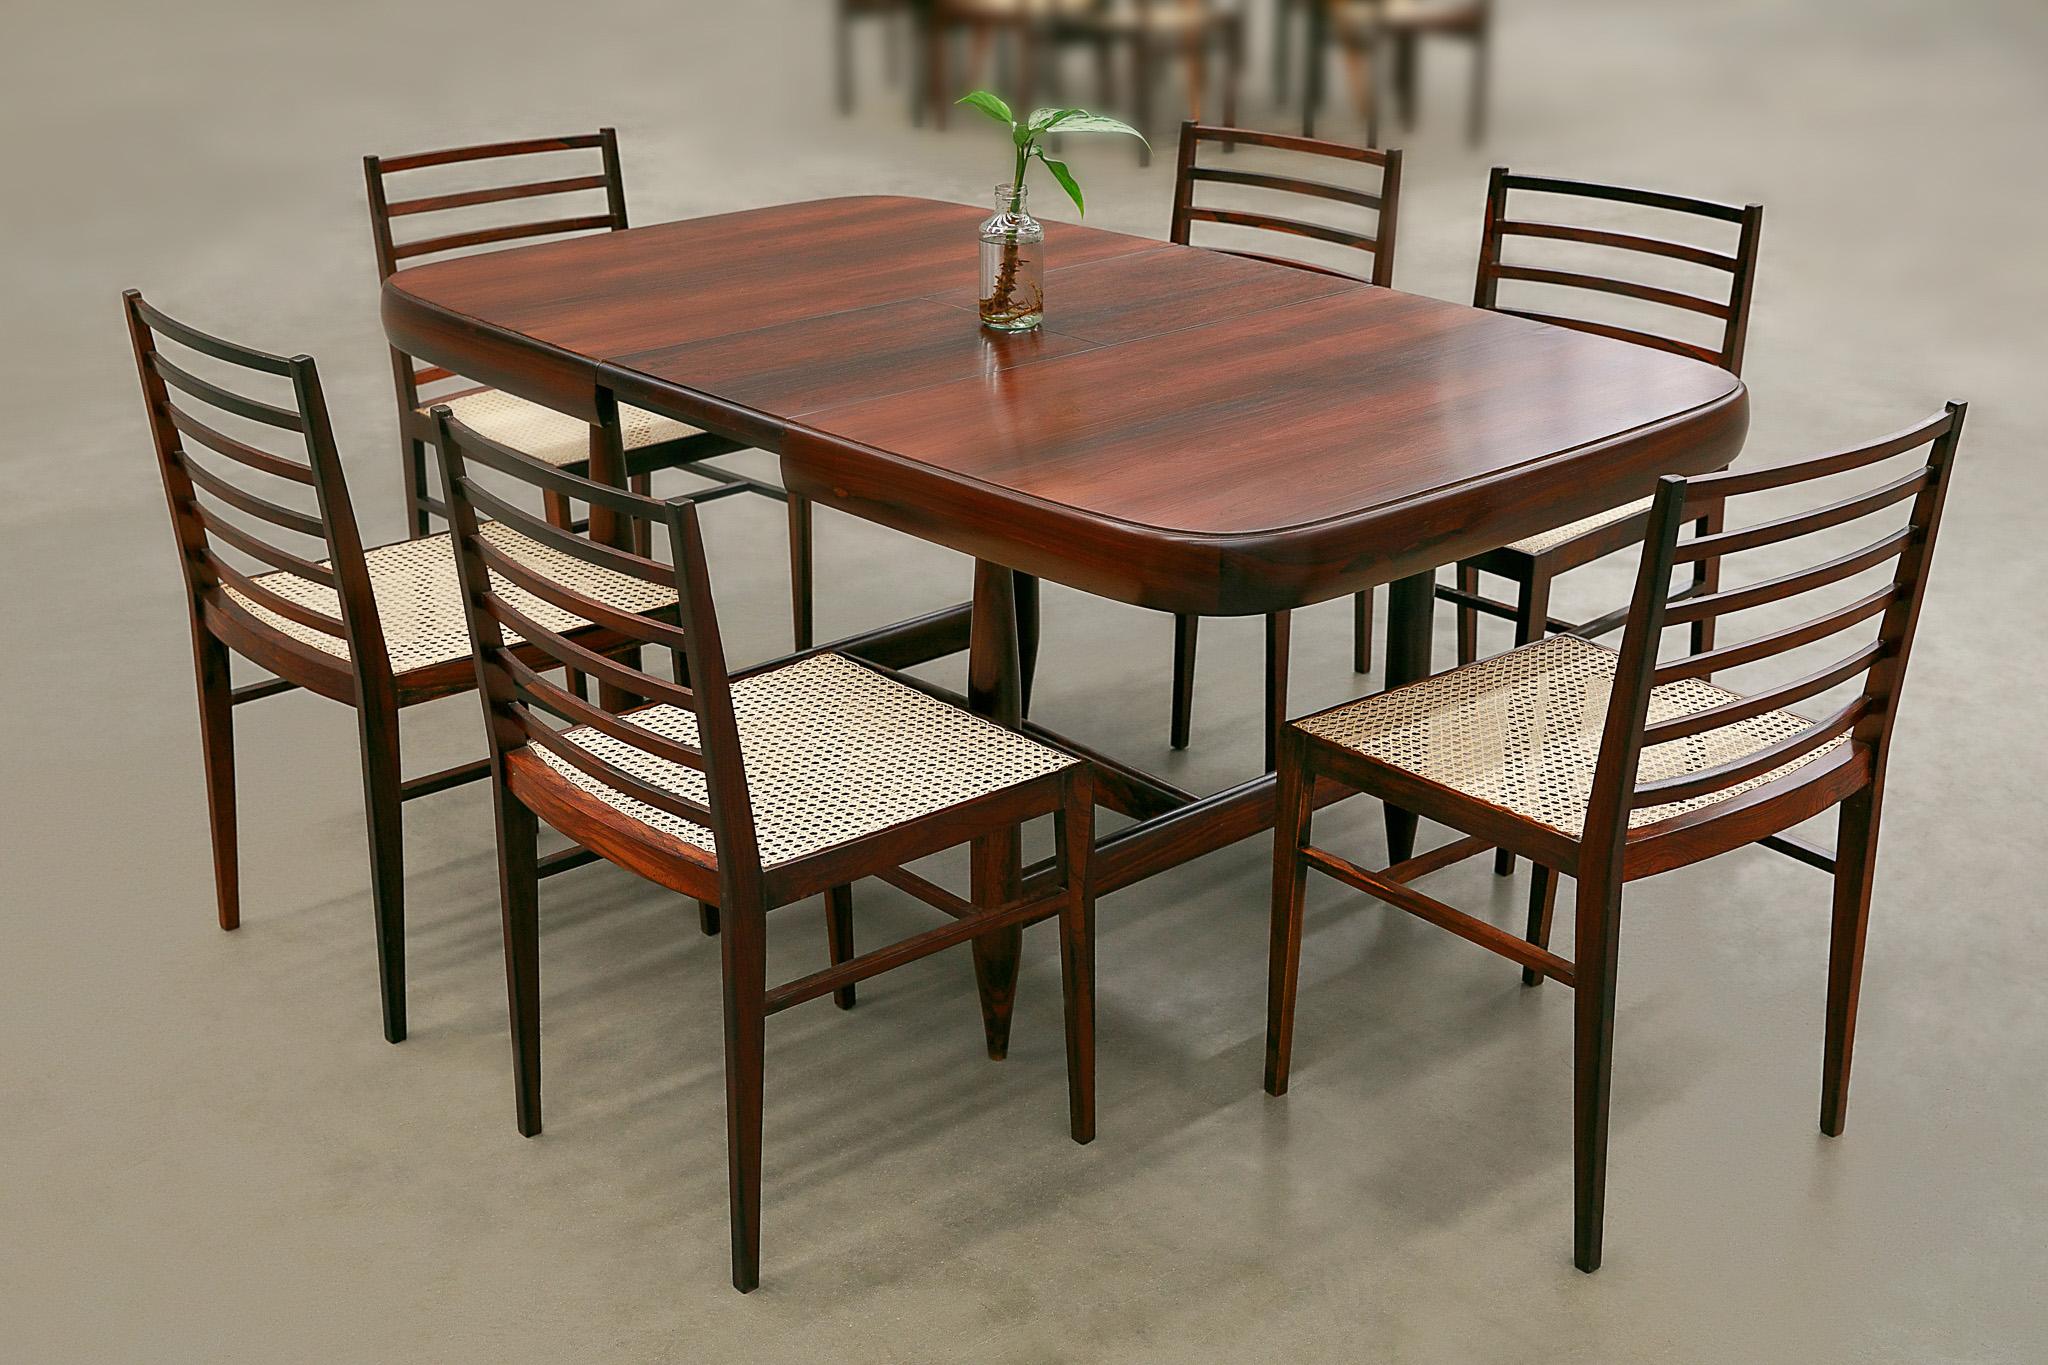 20th Century Midcentury Expandable Dining Table in Hardwood by Sergio Rodrigues, Brazil